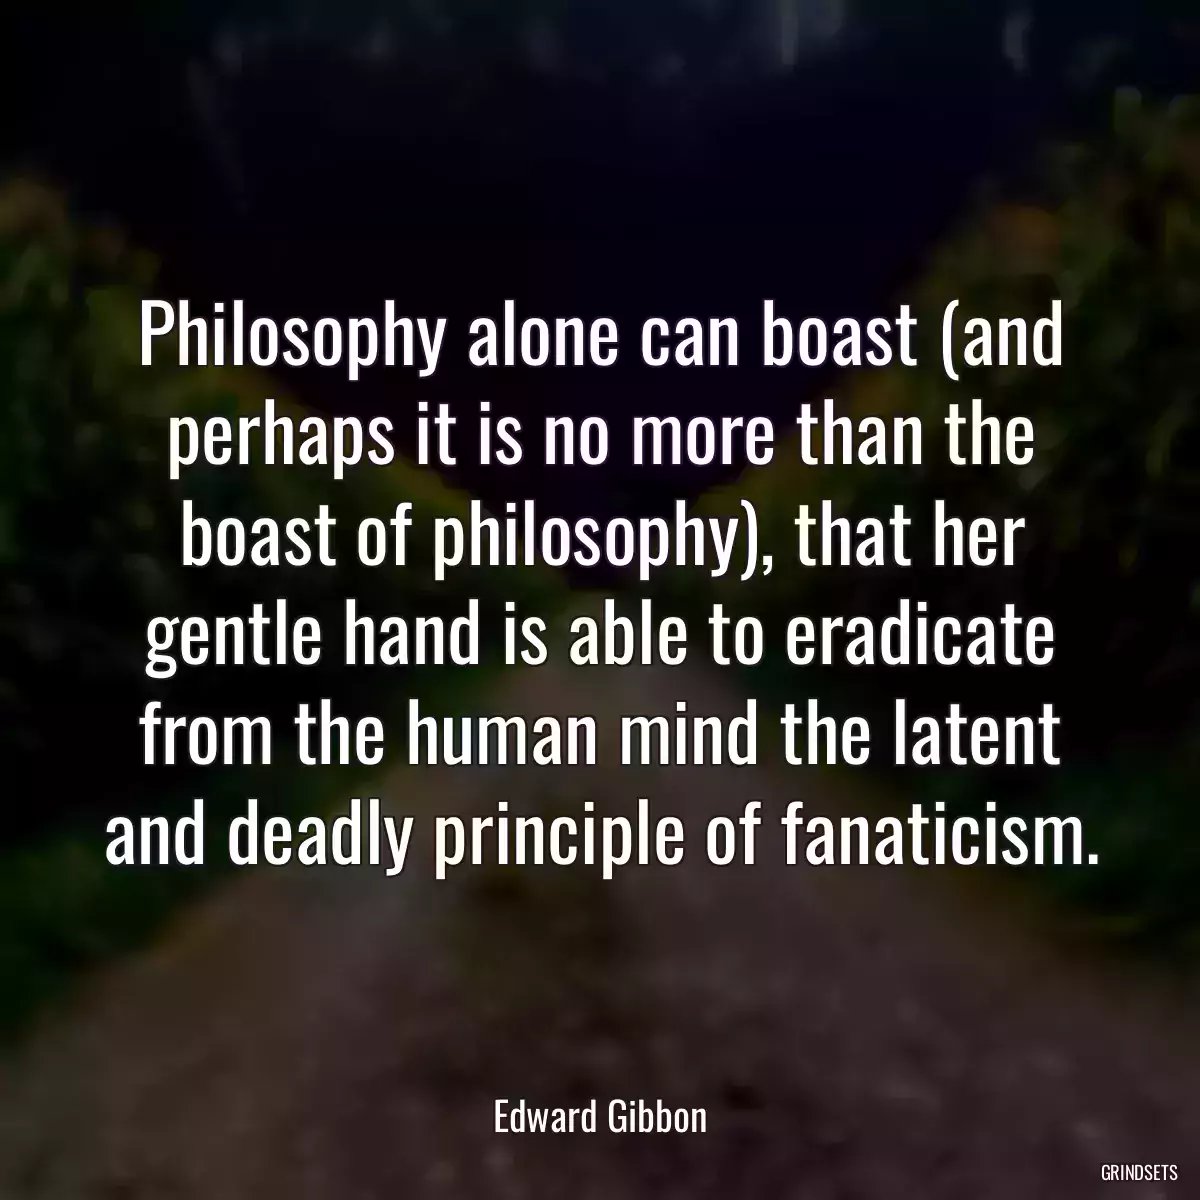 Philosophy alone can boast (and perhaps it is no more than the boast of philosophy), that her gentle hand is able to eradicate from the human mind the latent and deadly principle of fanaticism.